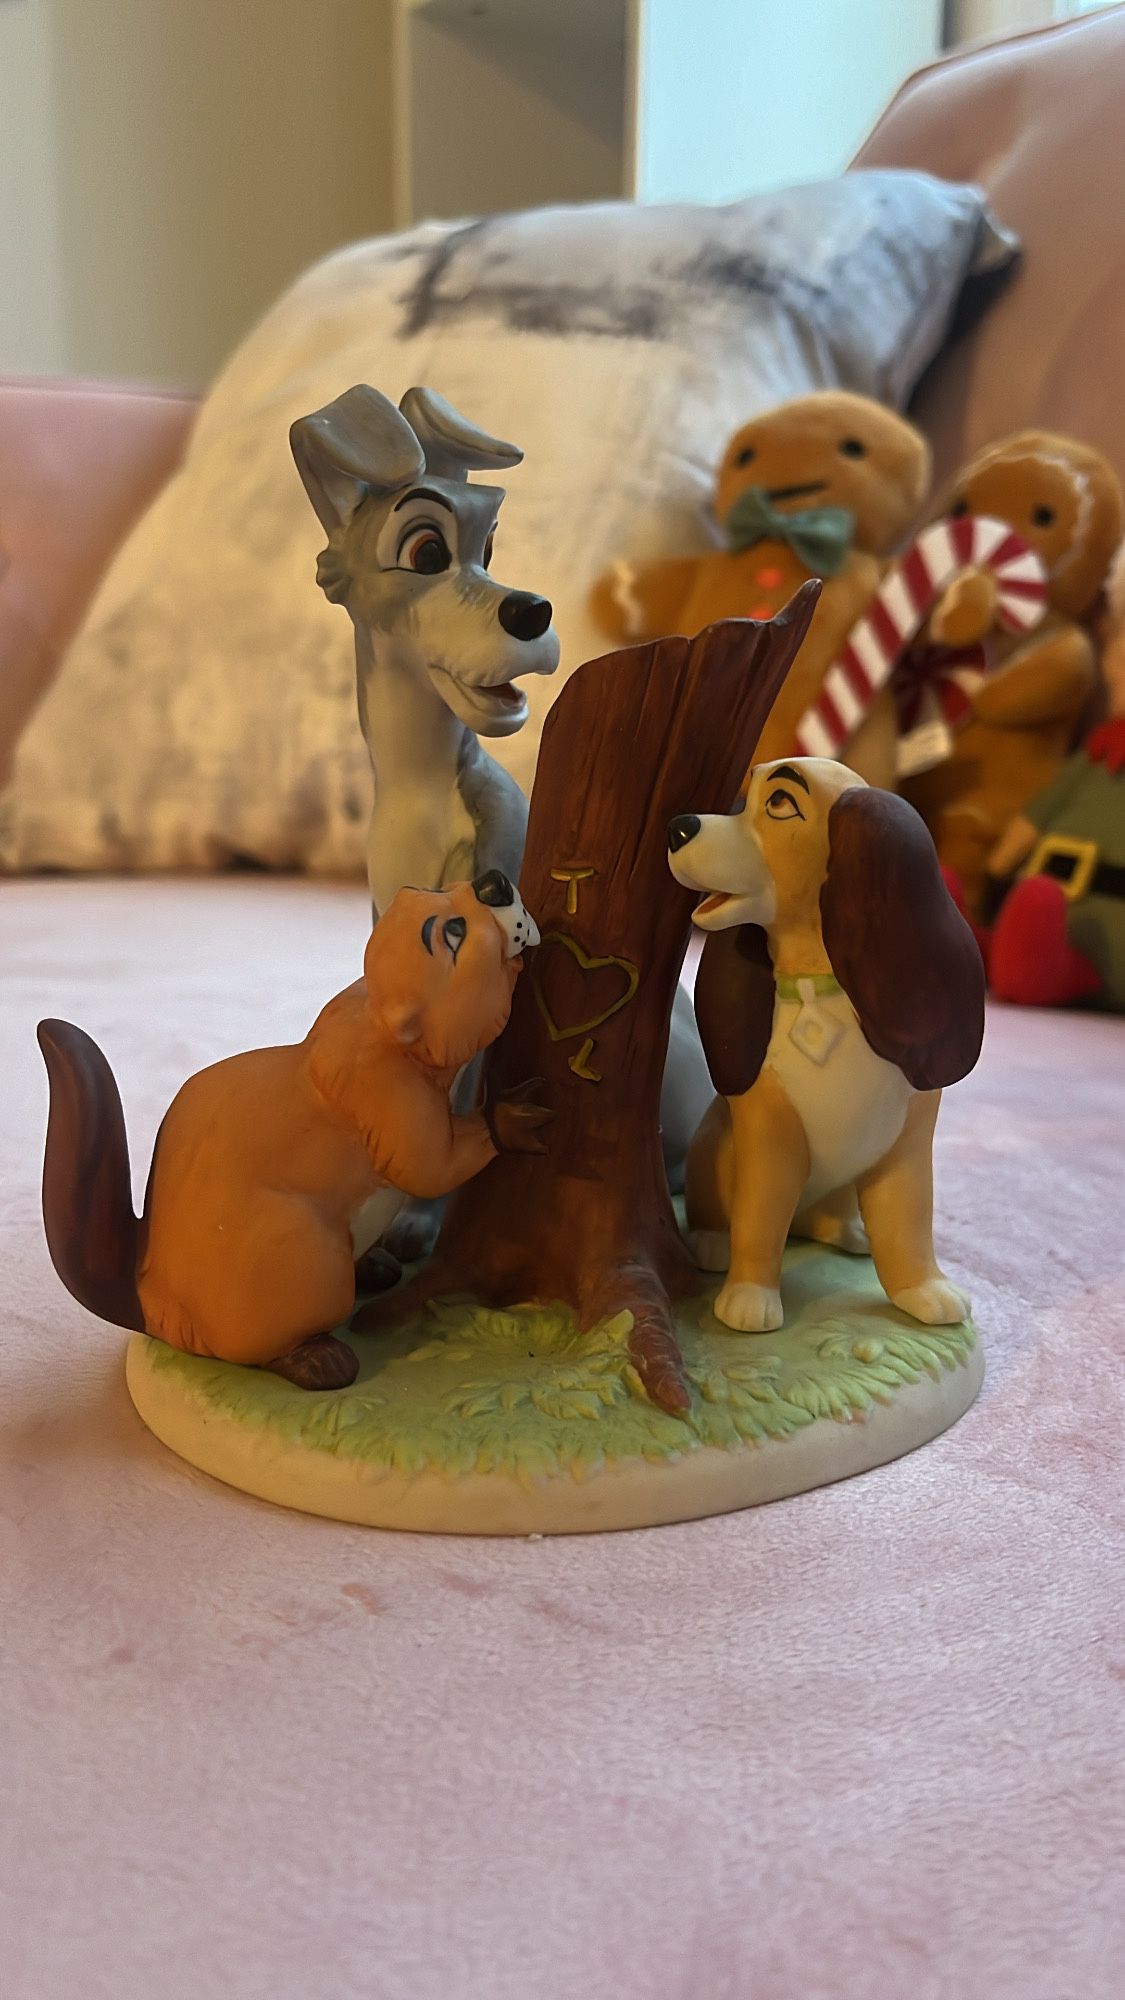 DISNEY MAGIC MEMORIES LADY AND THE TRAMP LIMITED EDITION